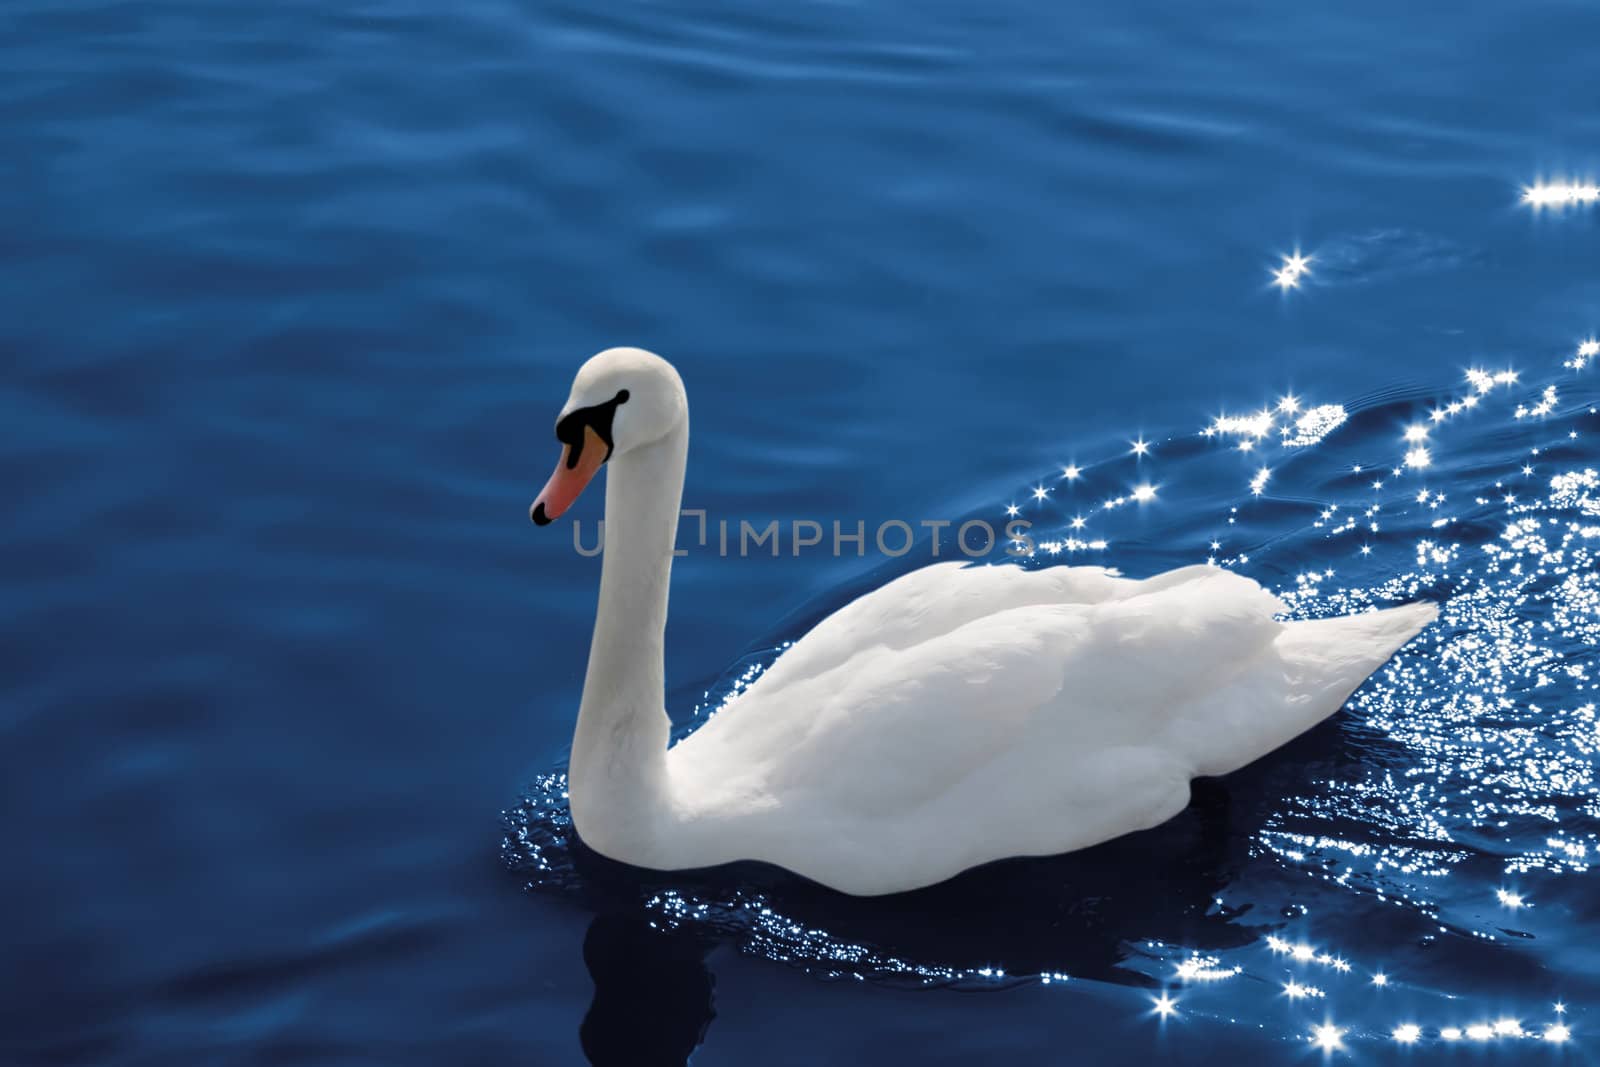 swan on water with reflection stars, clipping path